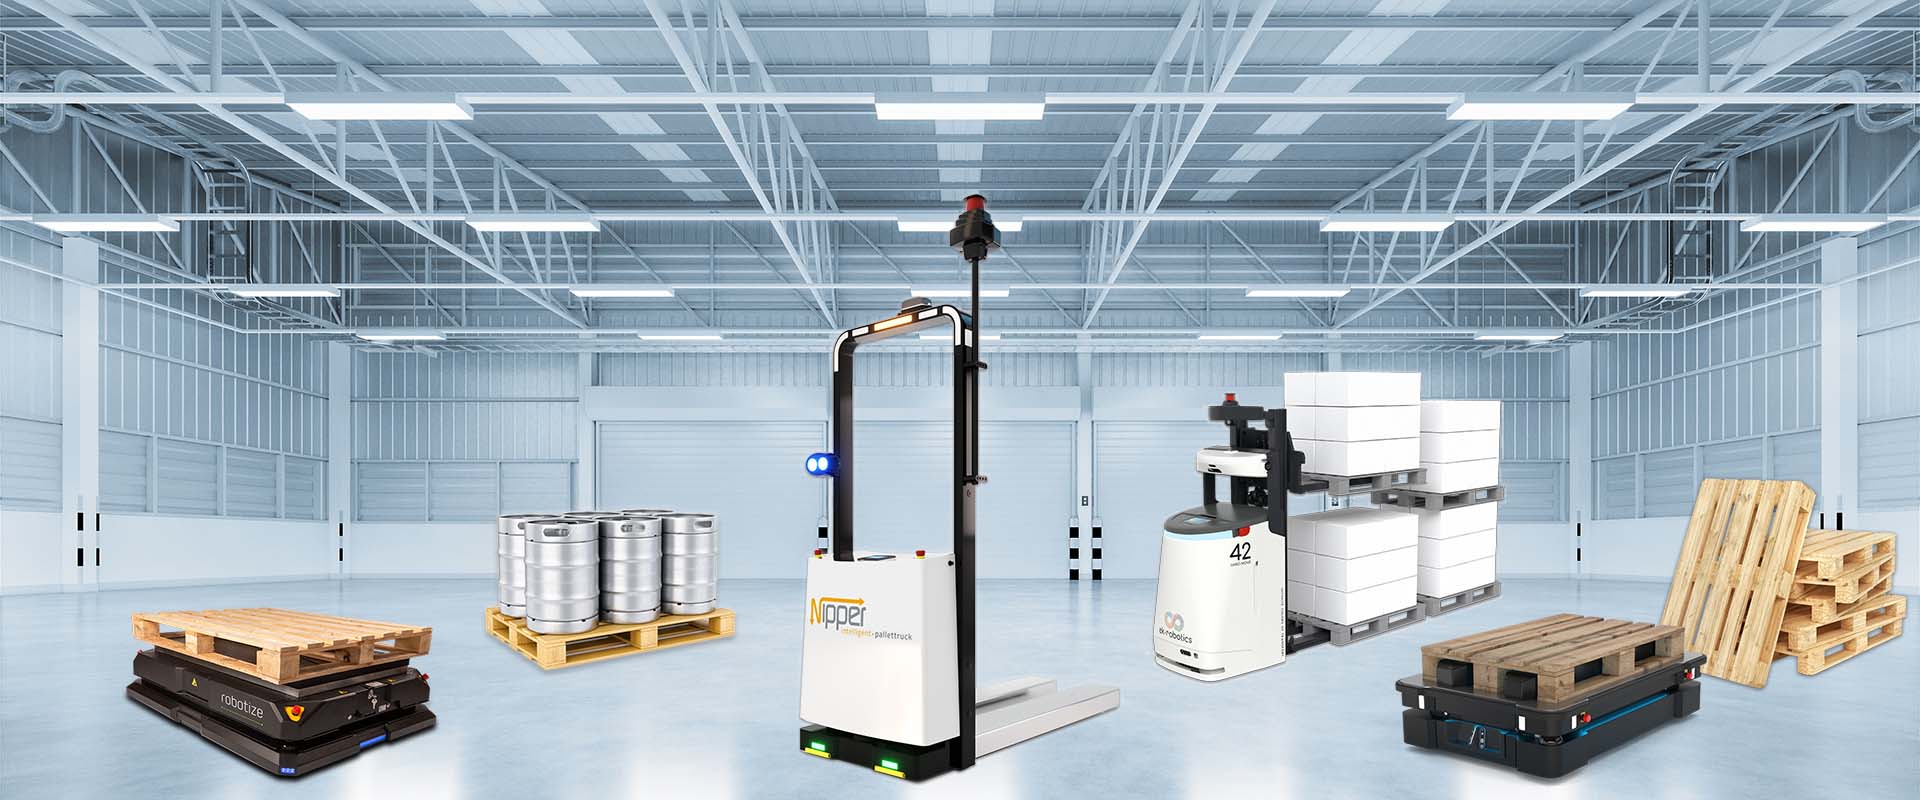 You will find automated guided vehicles (AGV) for the automation of your intralogistic pallet transport at MOBILE ROBOTS by DAHL Robotics, your integrator for autonomous mobile robots.